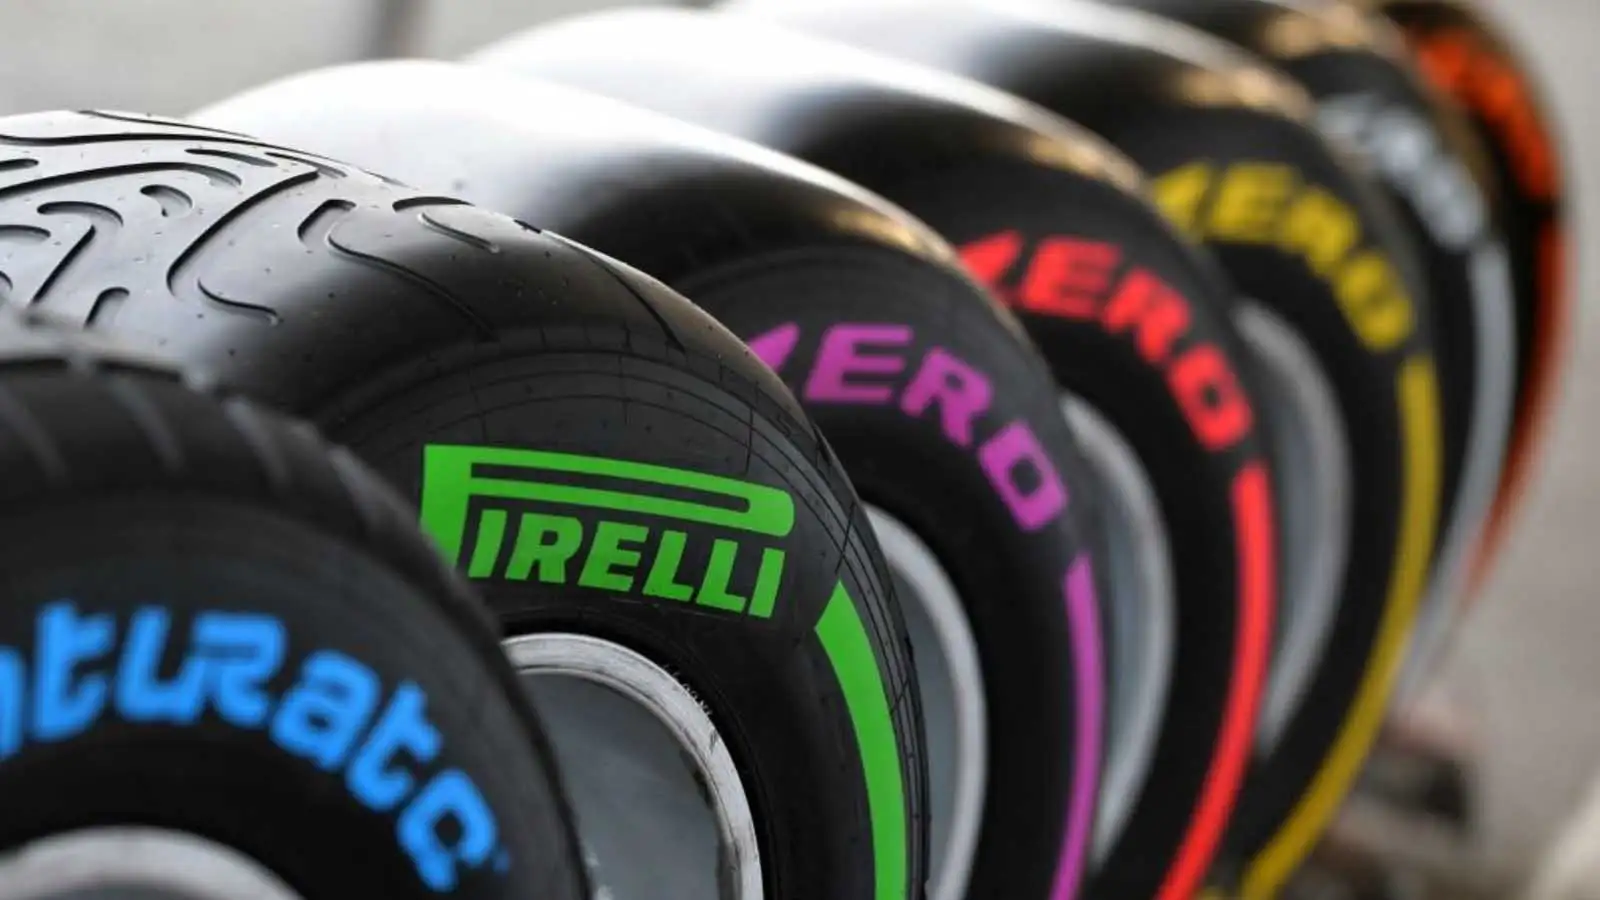 Pirelli F1 tyres lined up. 2018.